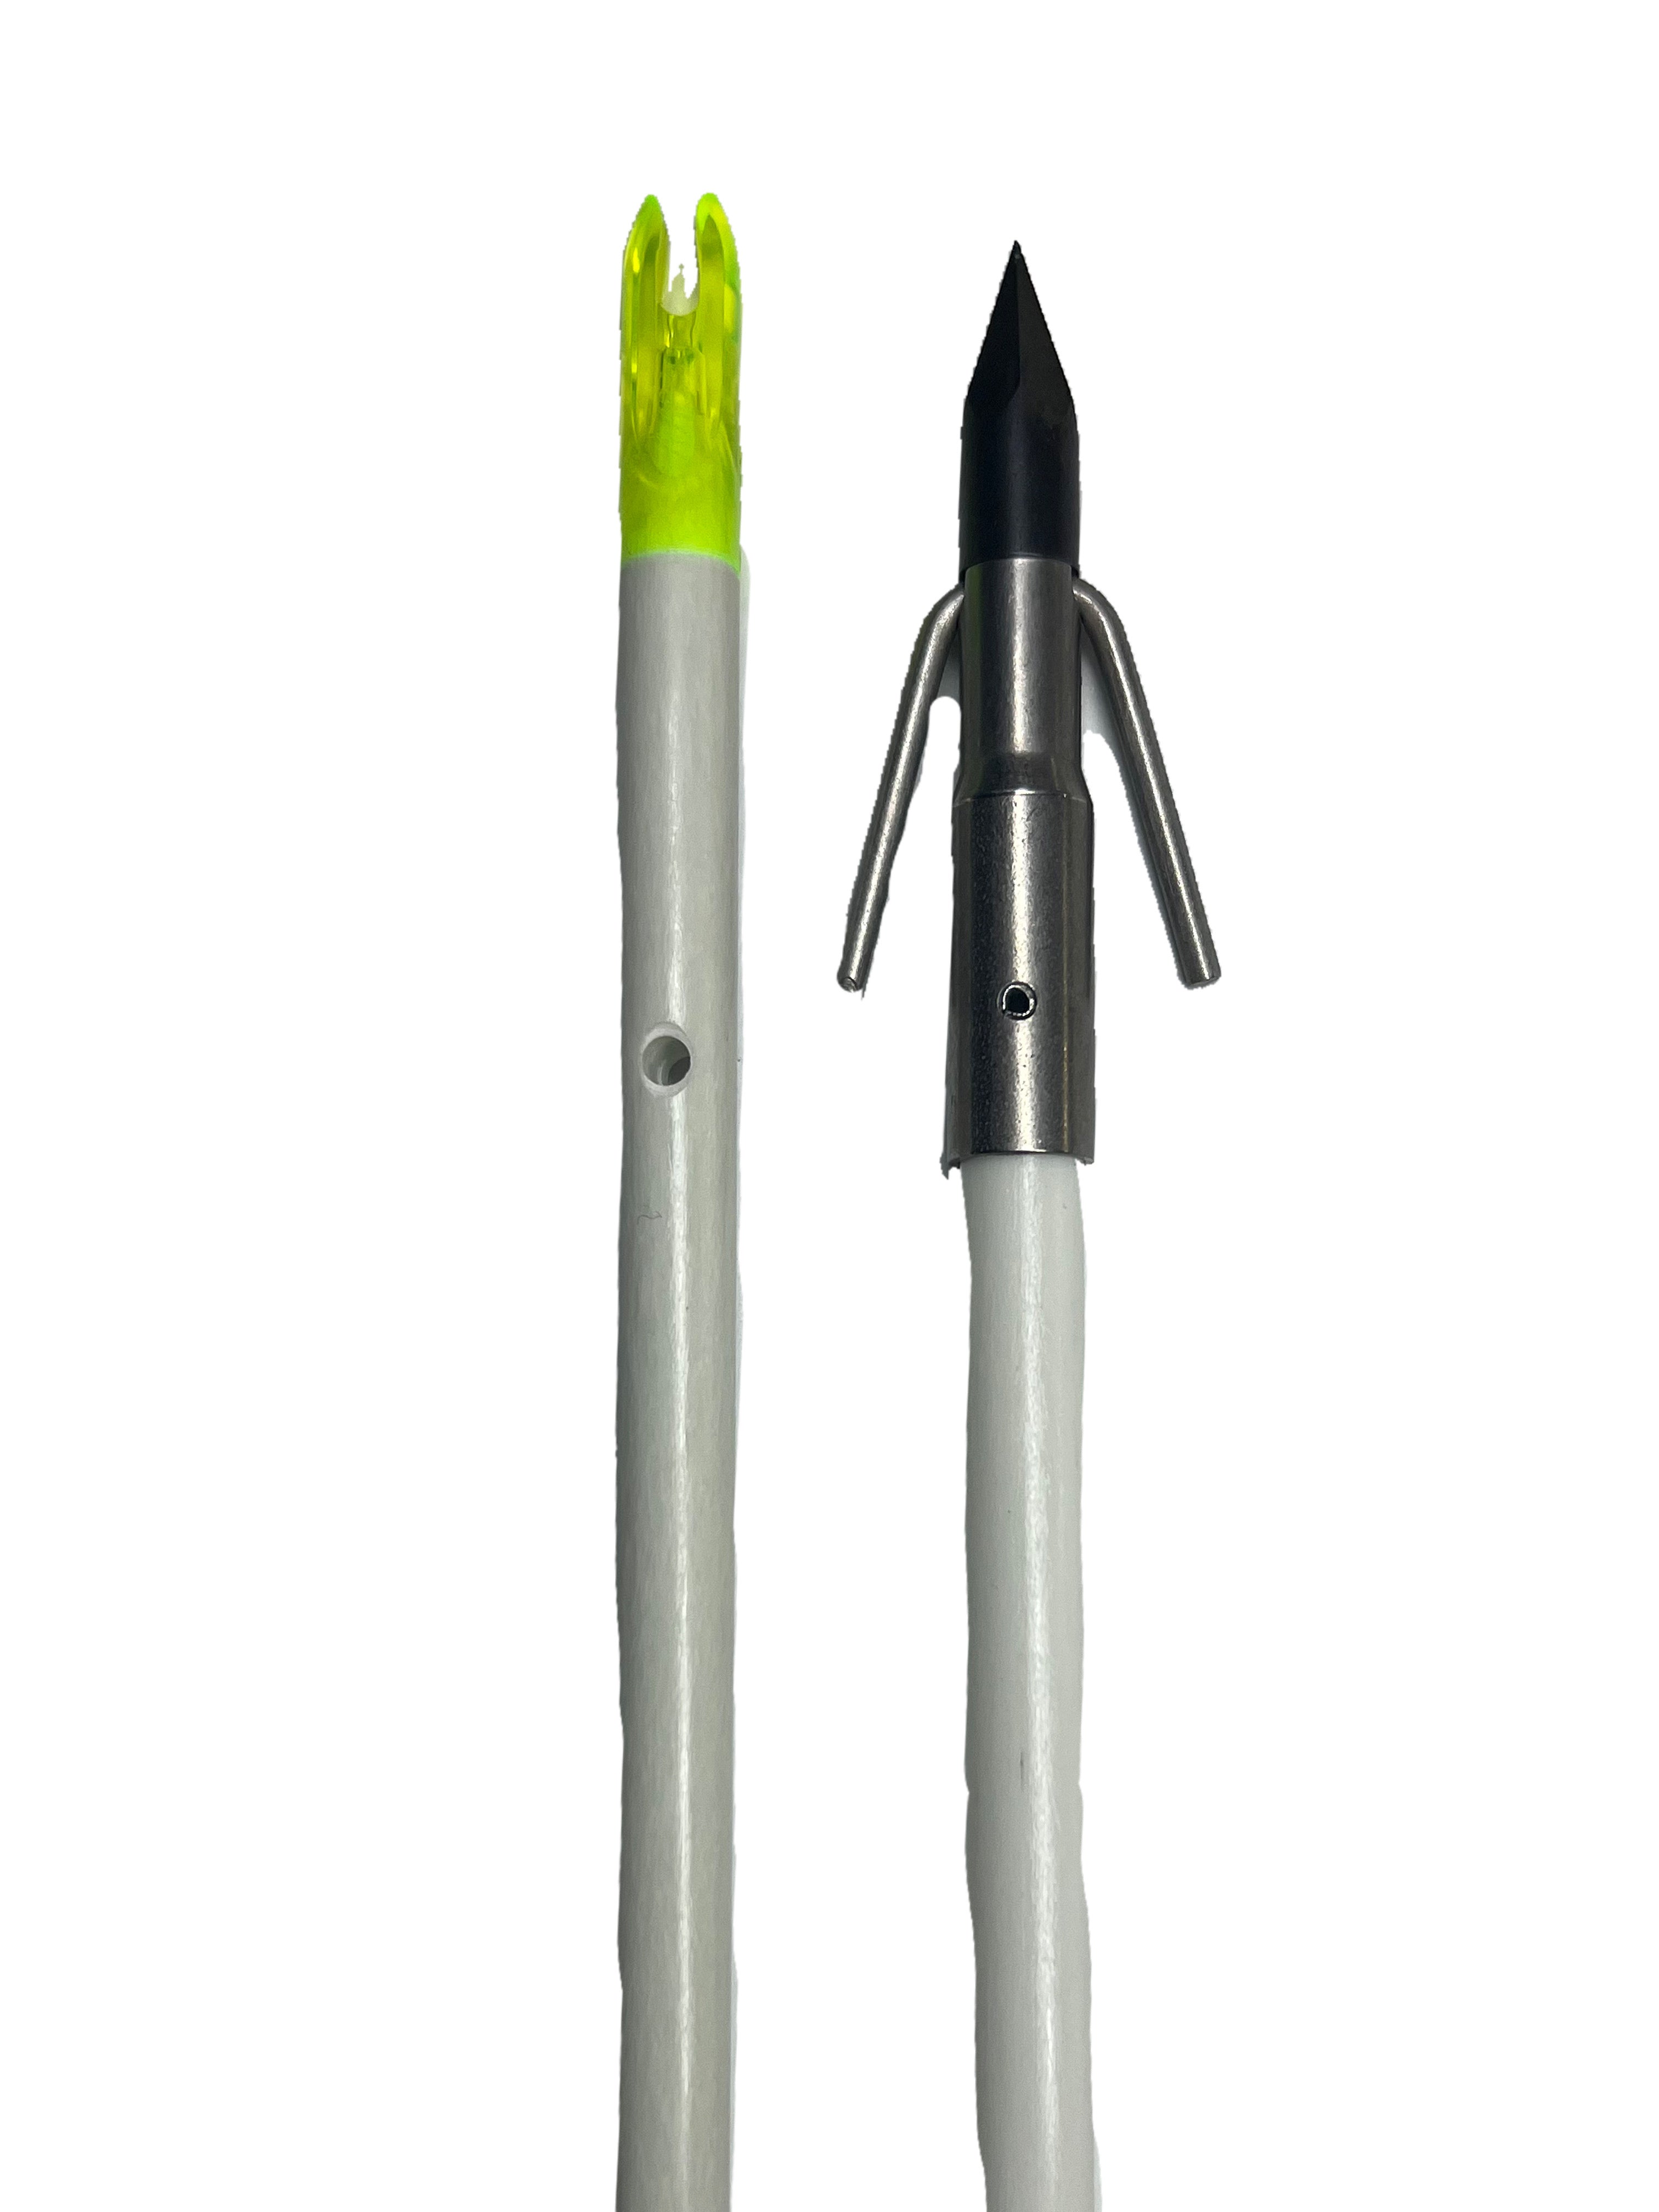 Muzzy Bowfishing Lighted Carbon Fish Arrow with Carp Point and